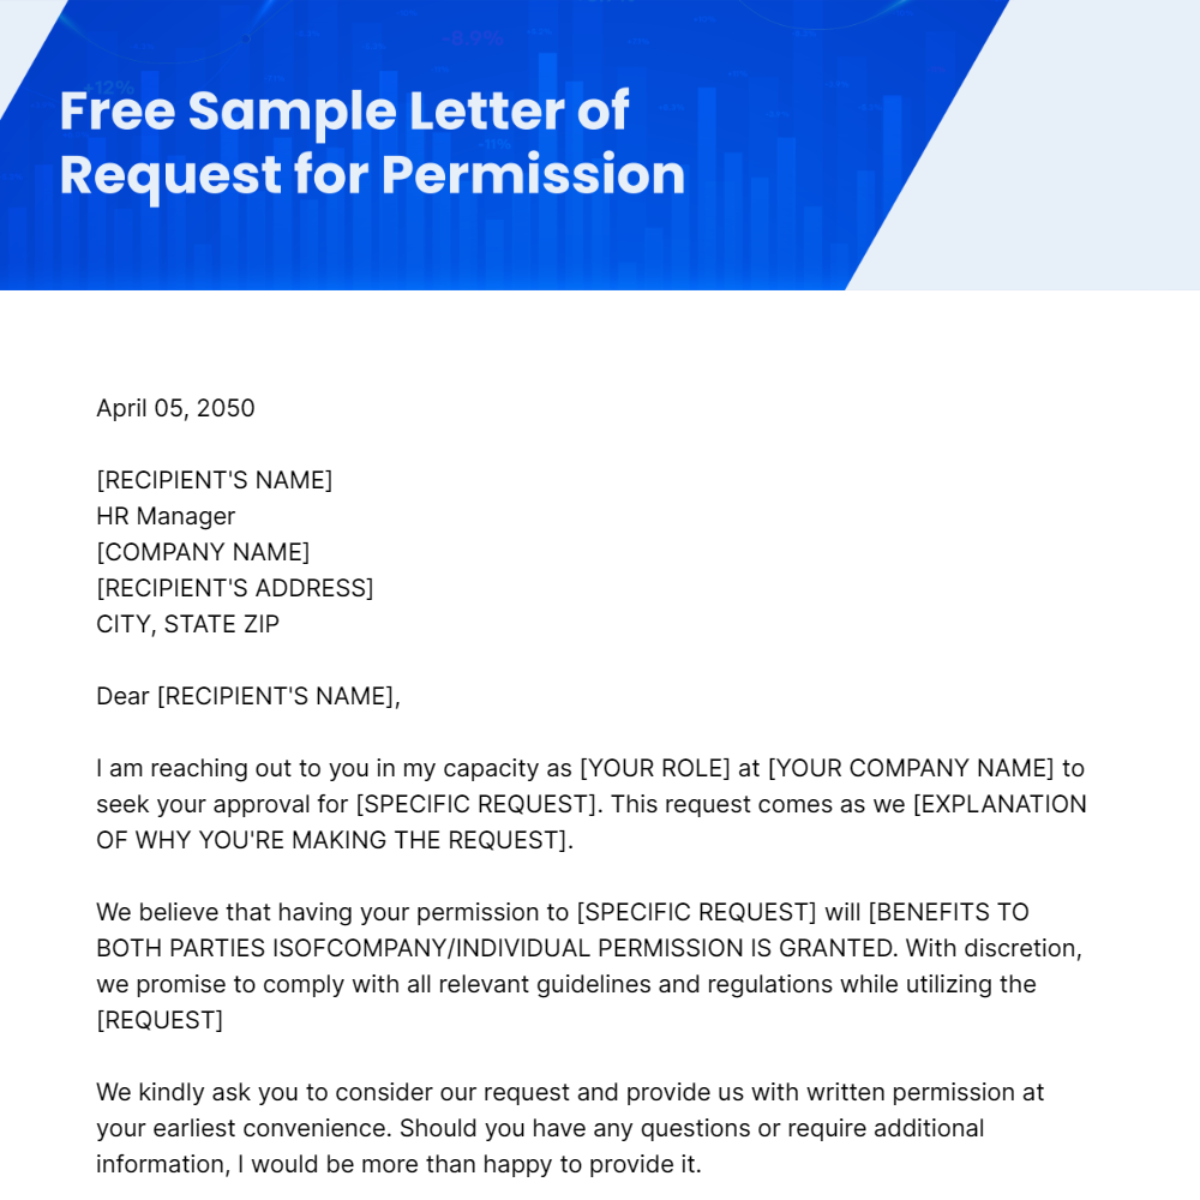 Sample Letter of Request for Permission Template